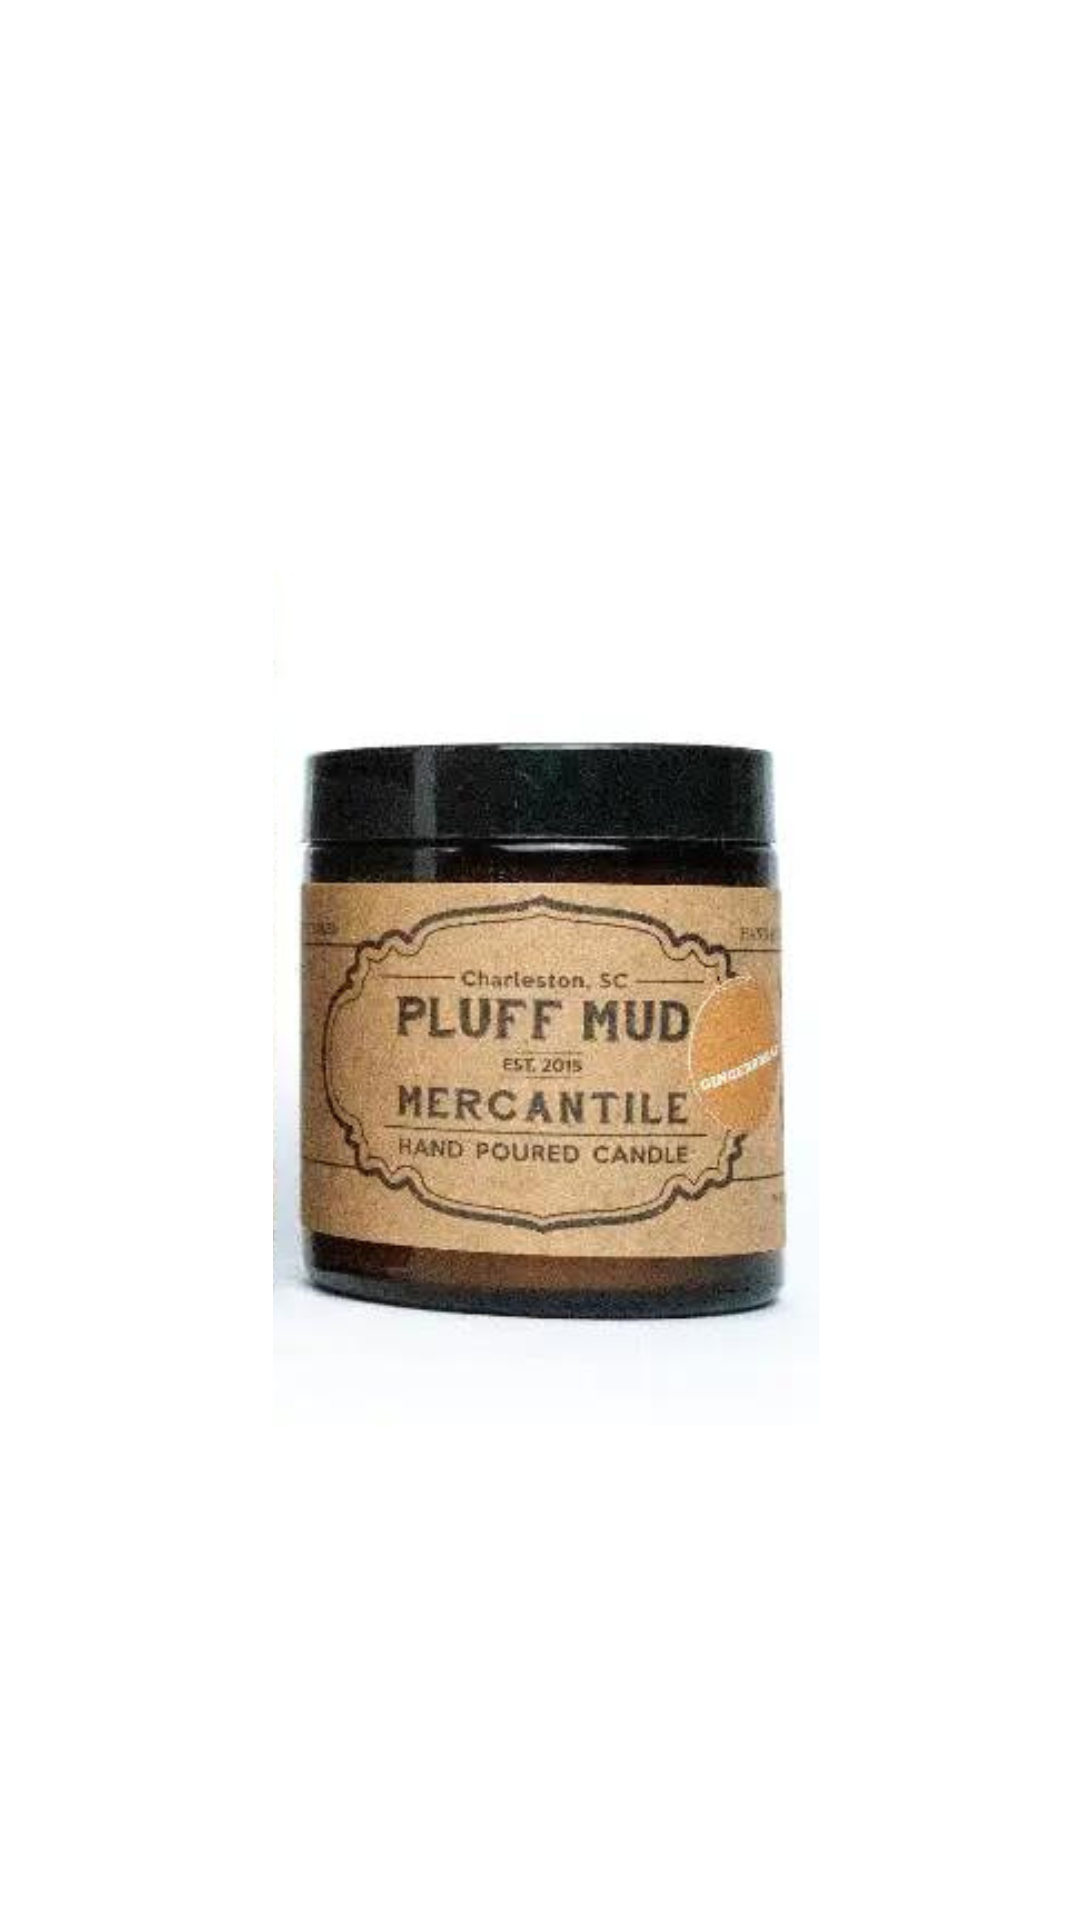 Gather Hand Poured Soy Candle - Pluff Mud Mercantile